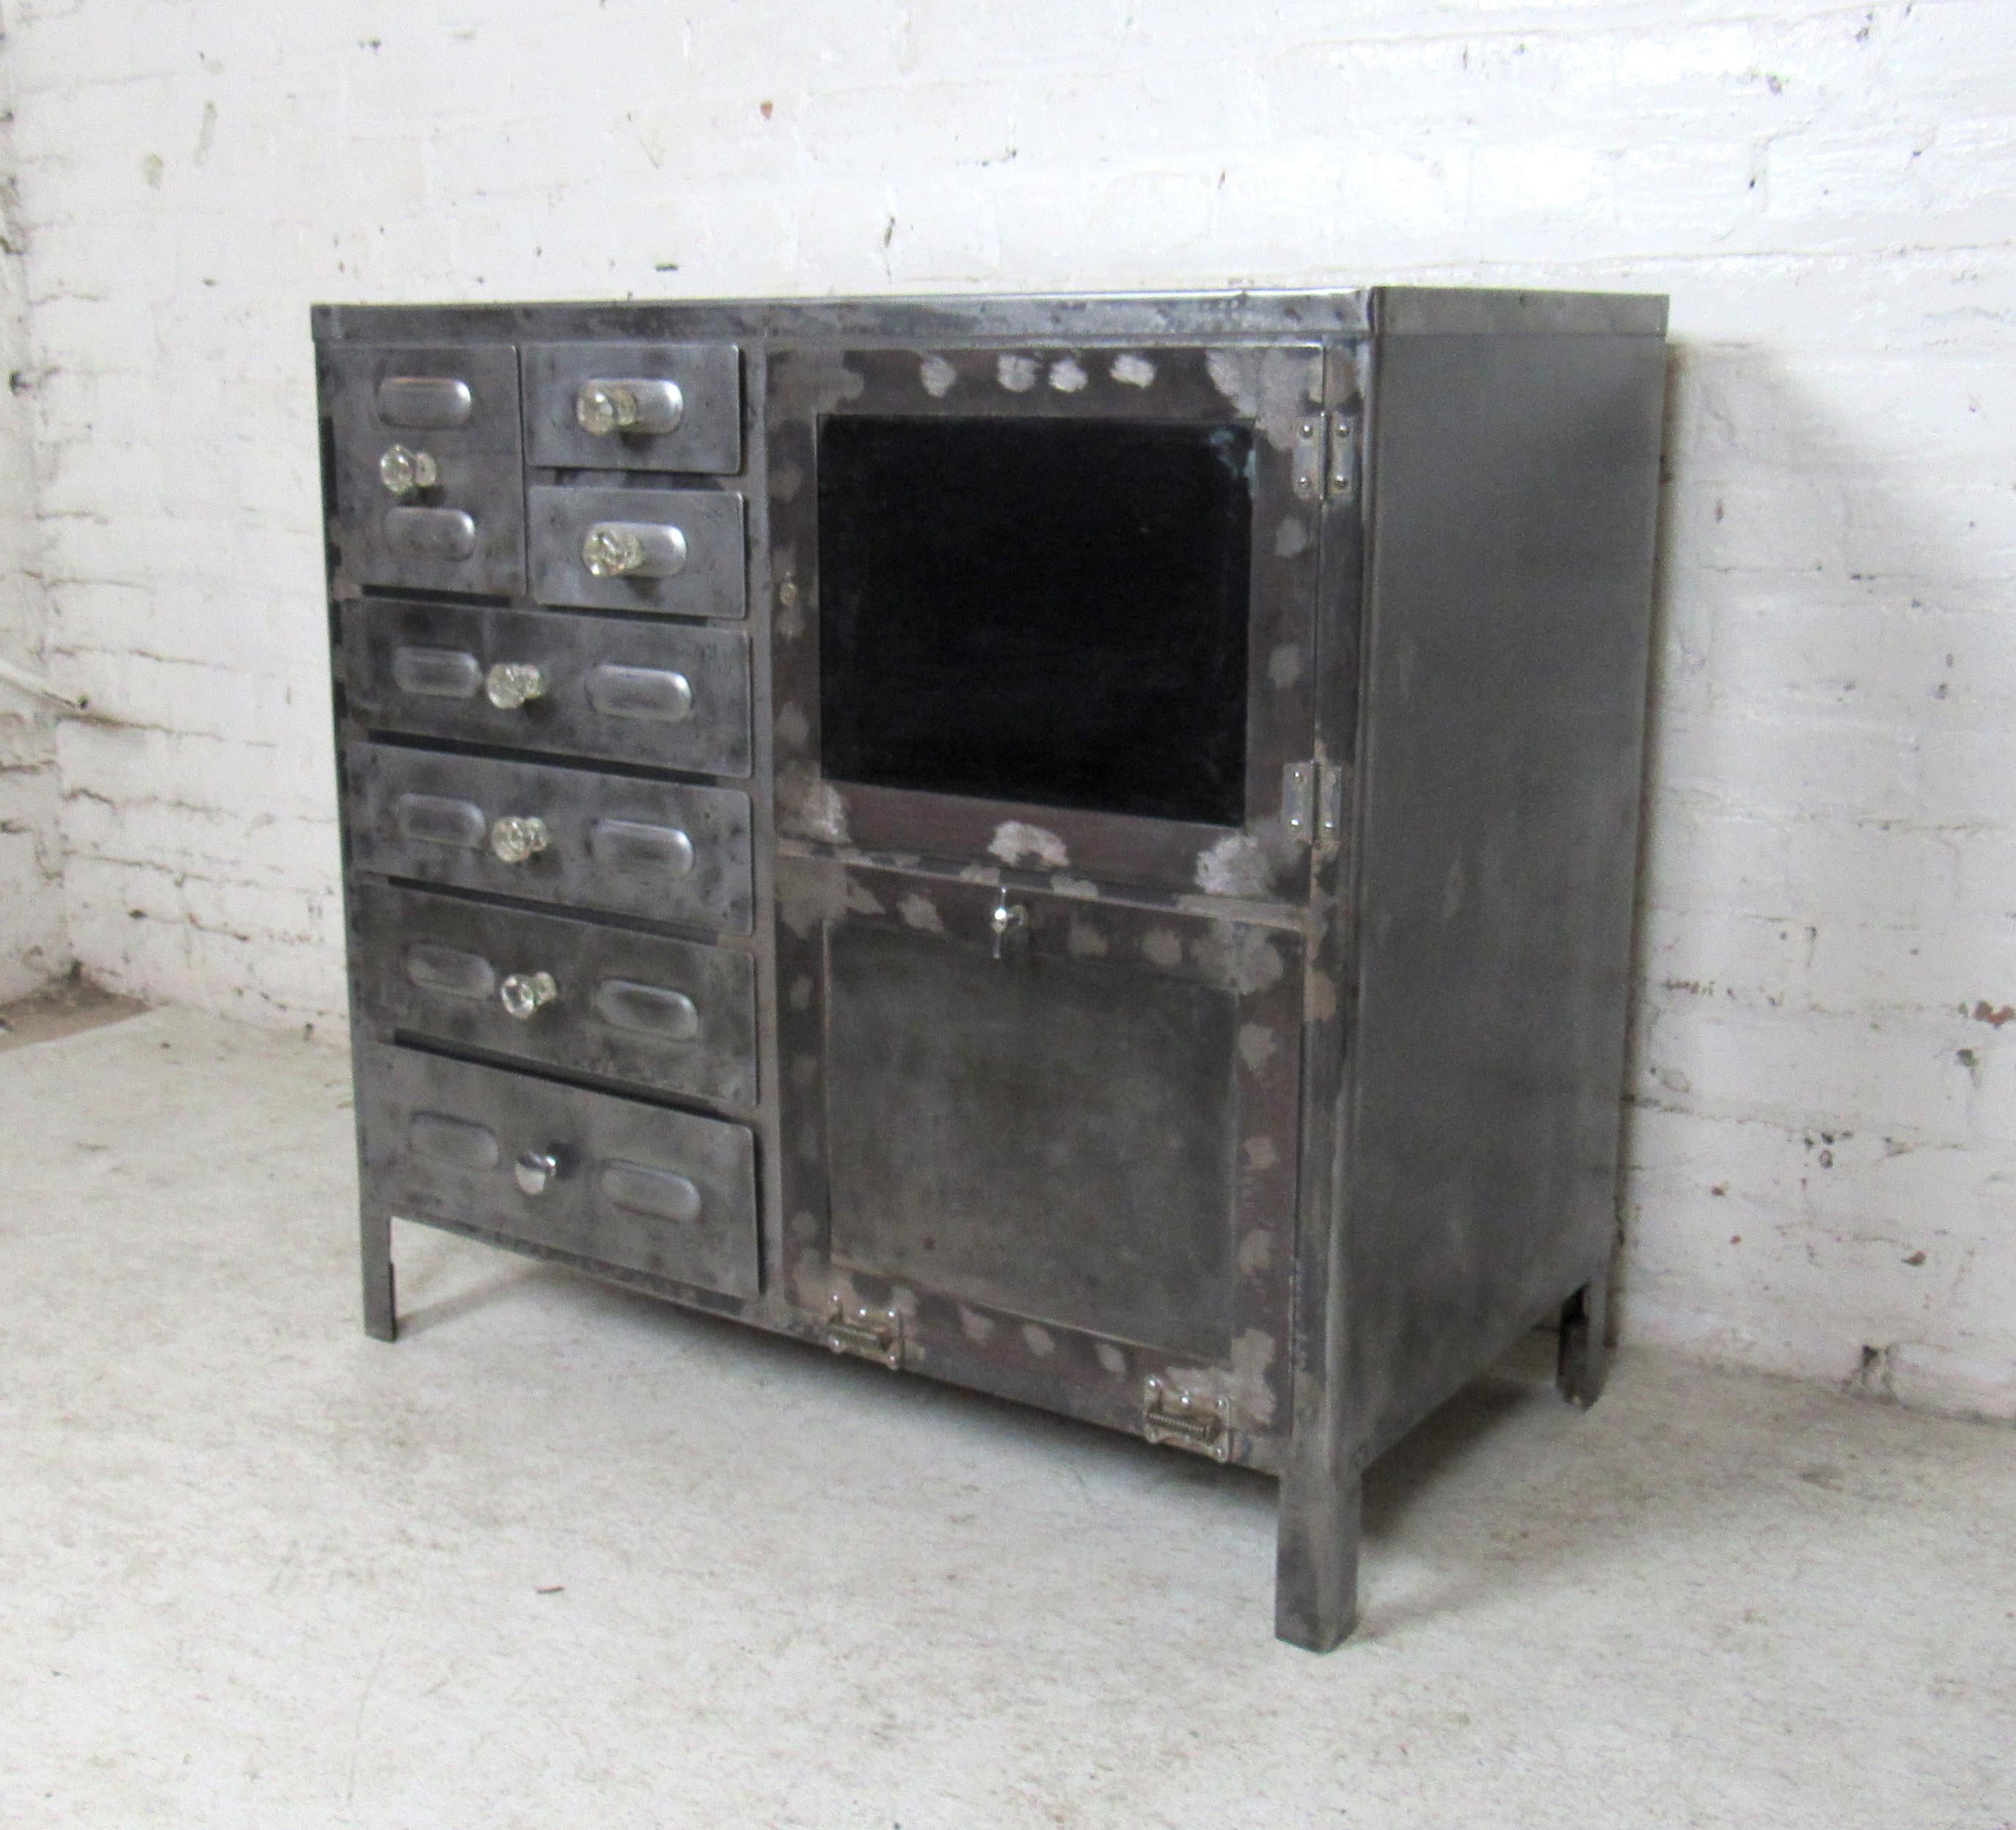 Unique Industrial metal cabinet with ample storage through drawers and larger cabinet doors. Sturdy metal construction is combined with aged character to make this cabinet an eye-catching piece.